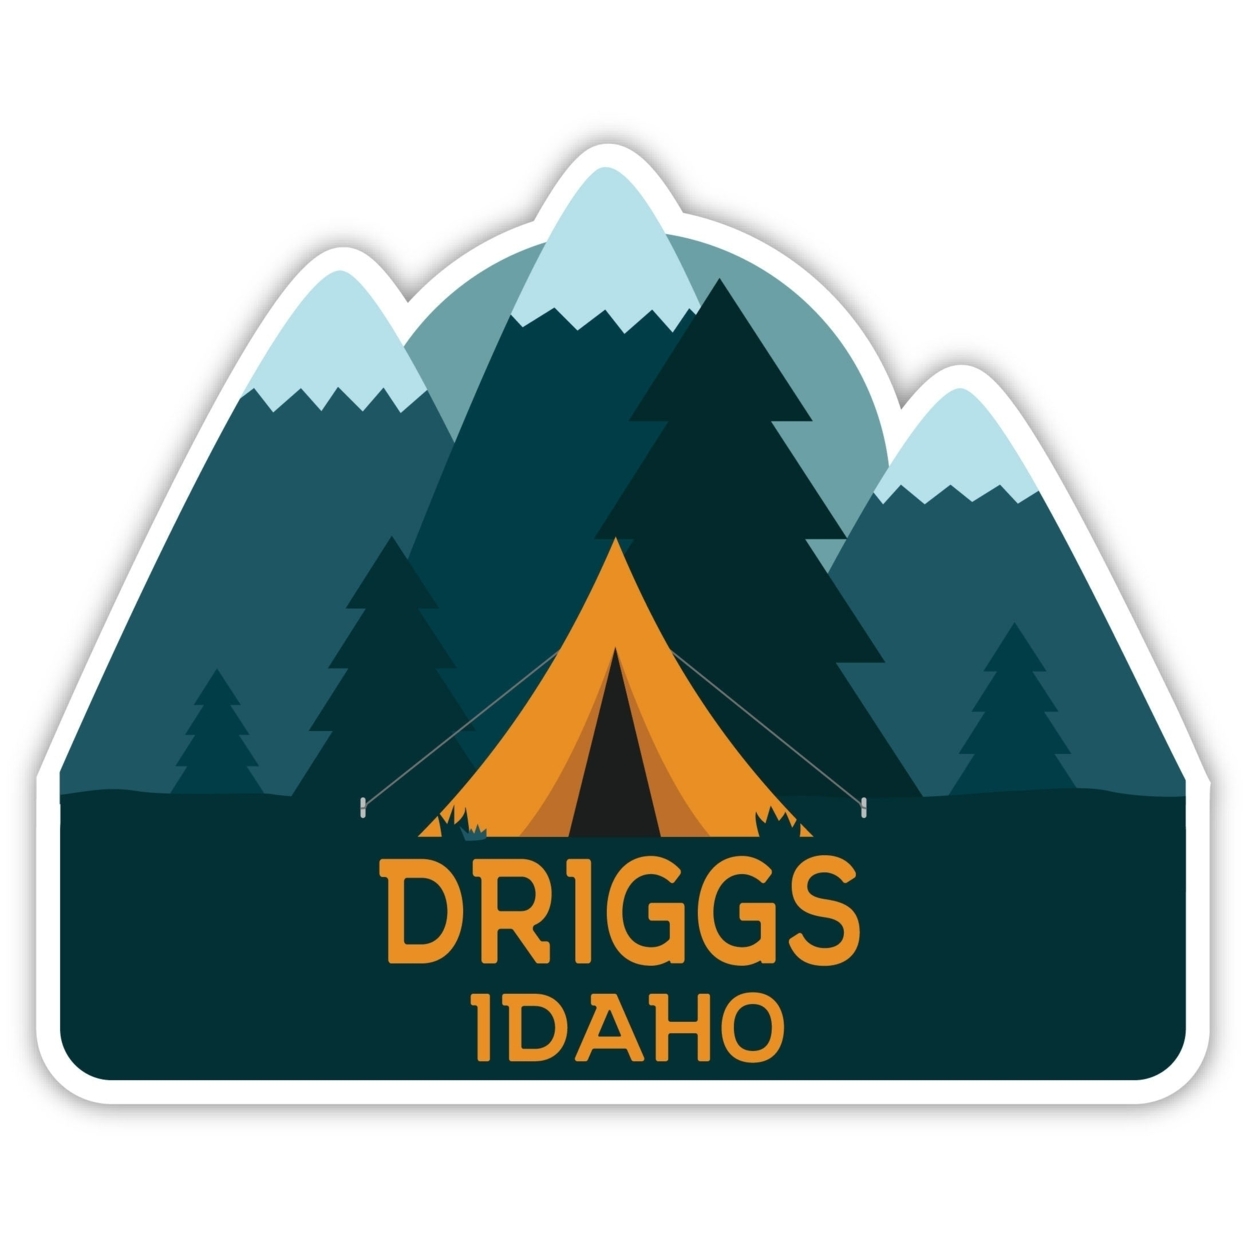 Driggs Idaho Souvenir Decorative Stickers (Choose Theme And Size) - Single Unit, 2-Inch, Great Outdoors